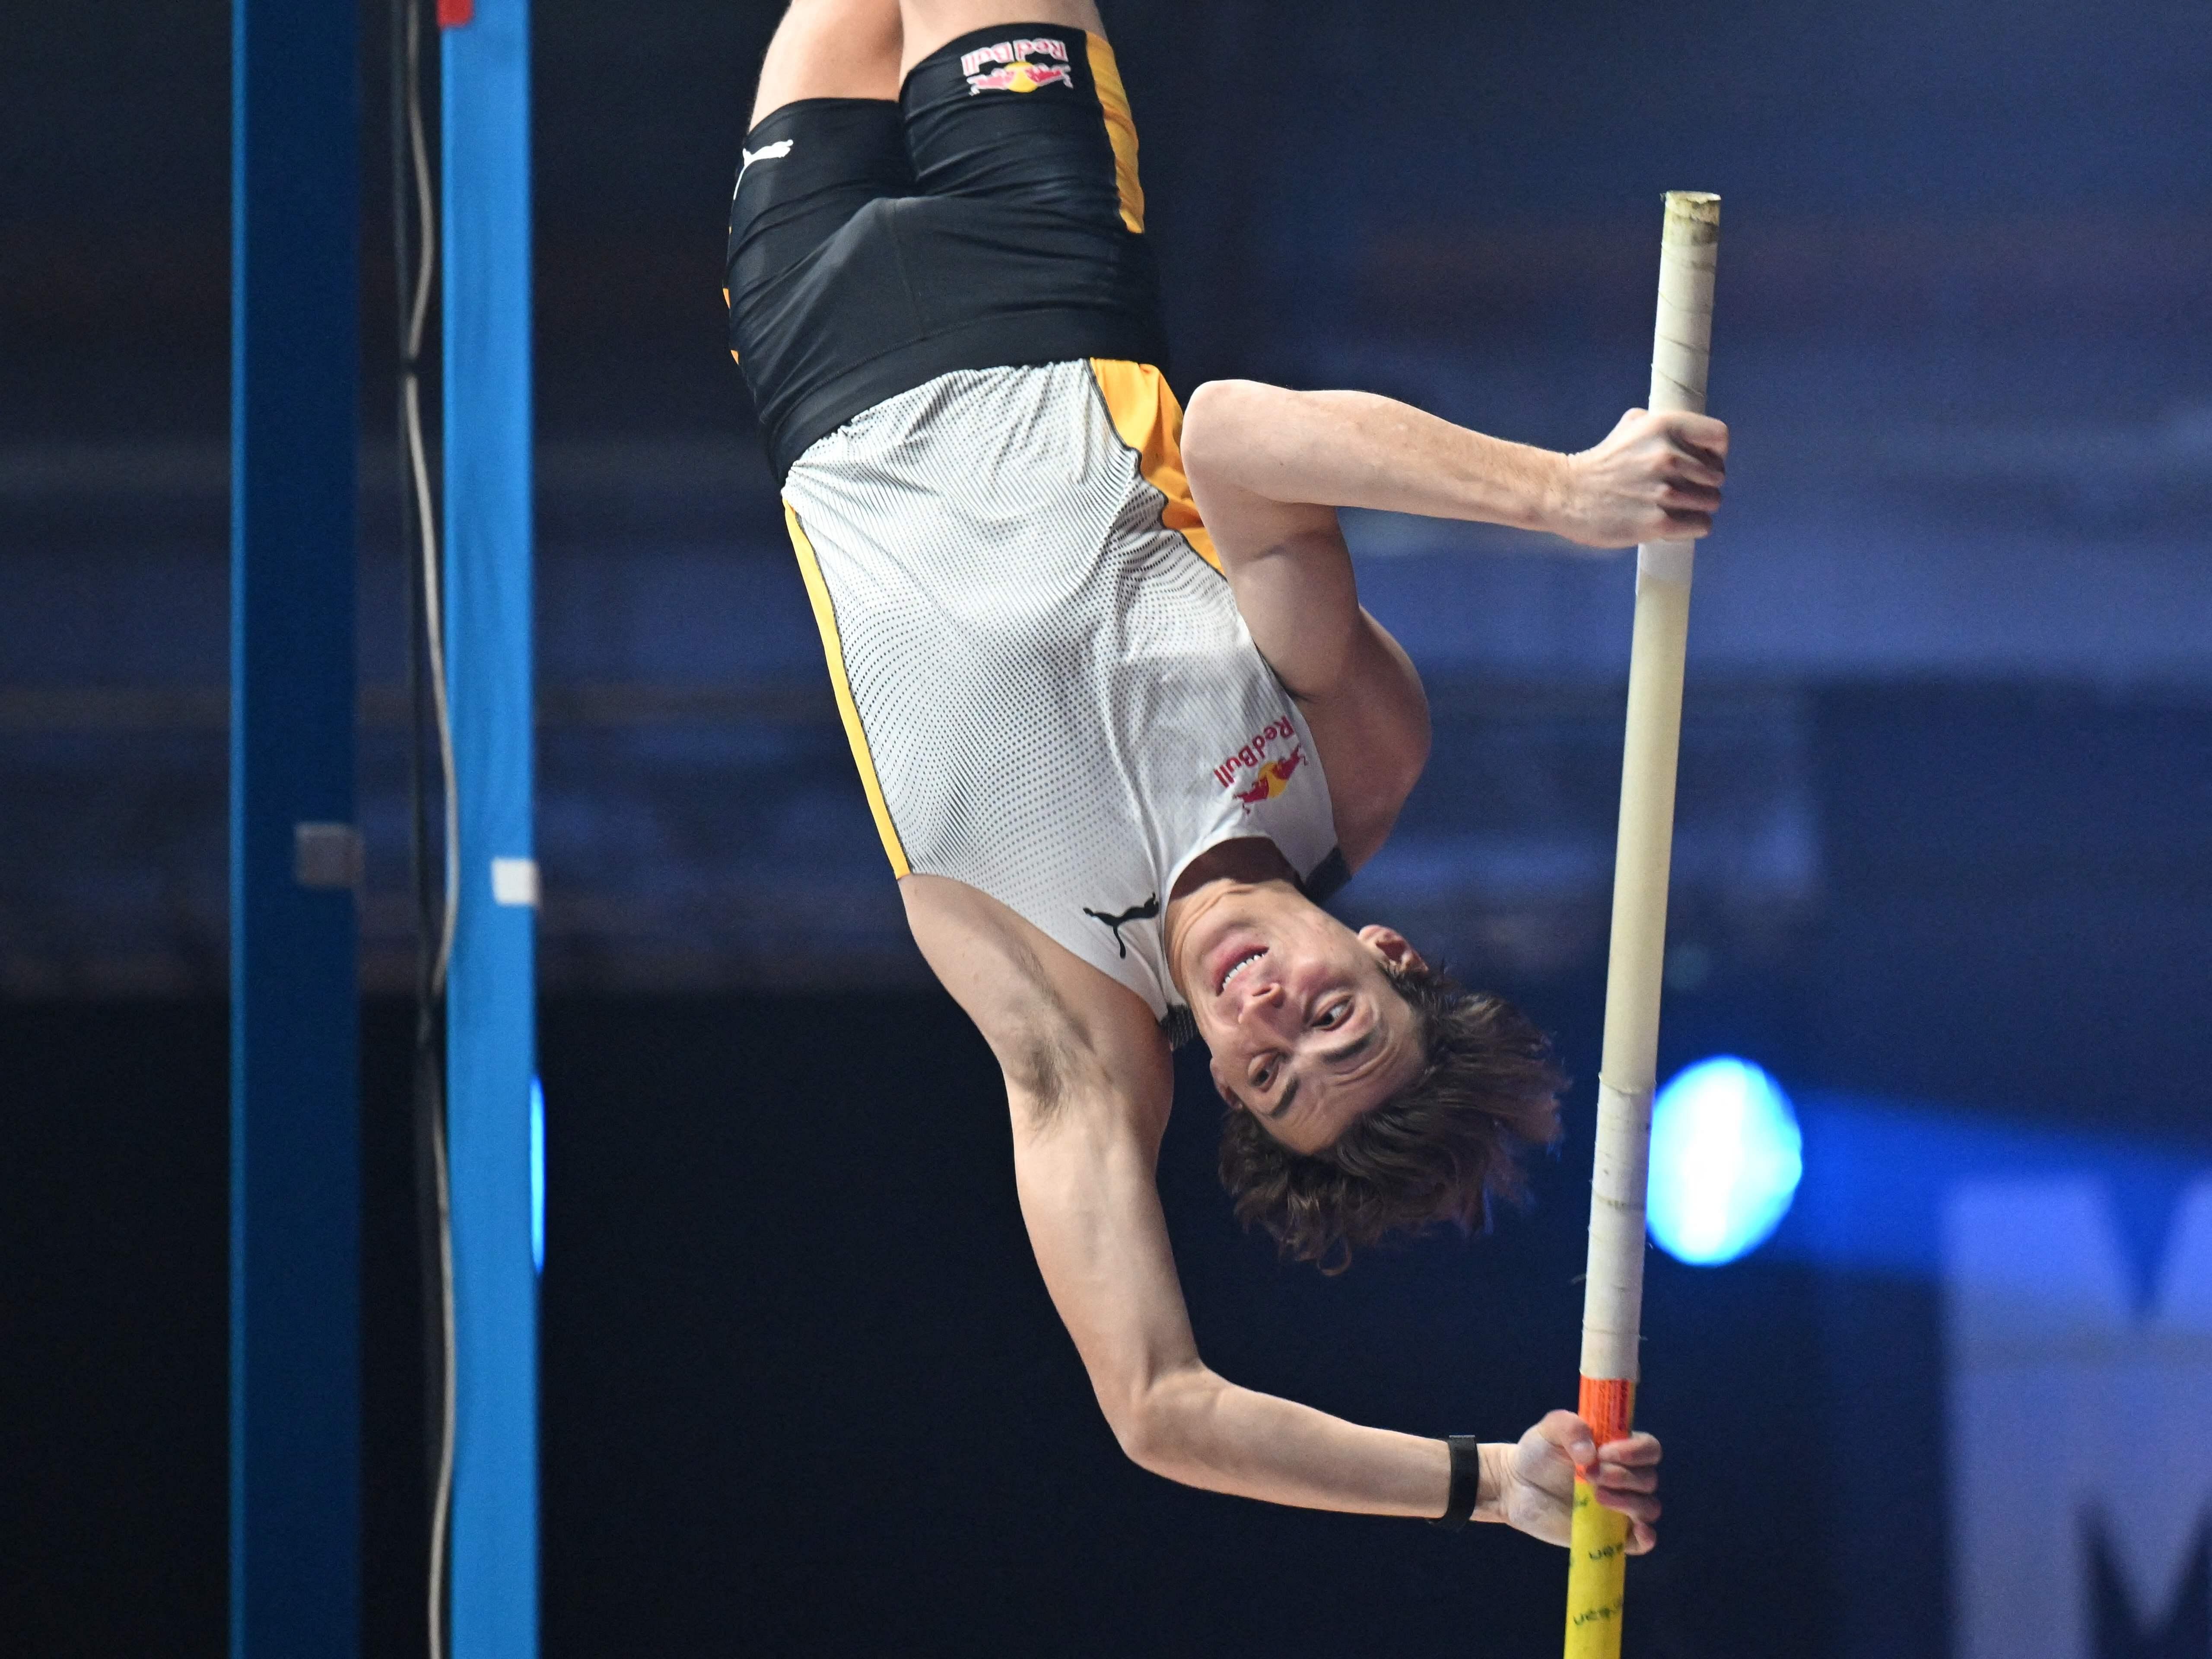 Armand Duplantis says he is in ‘good shape’ and aiming for vault record